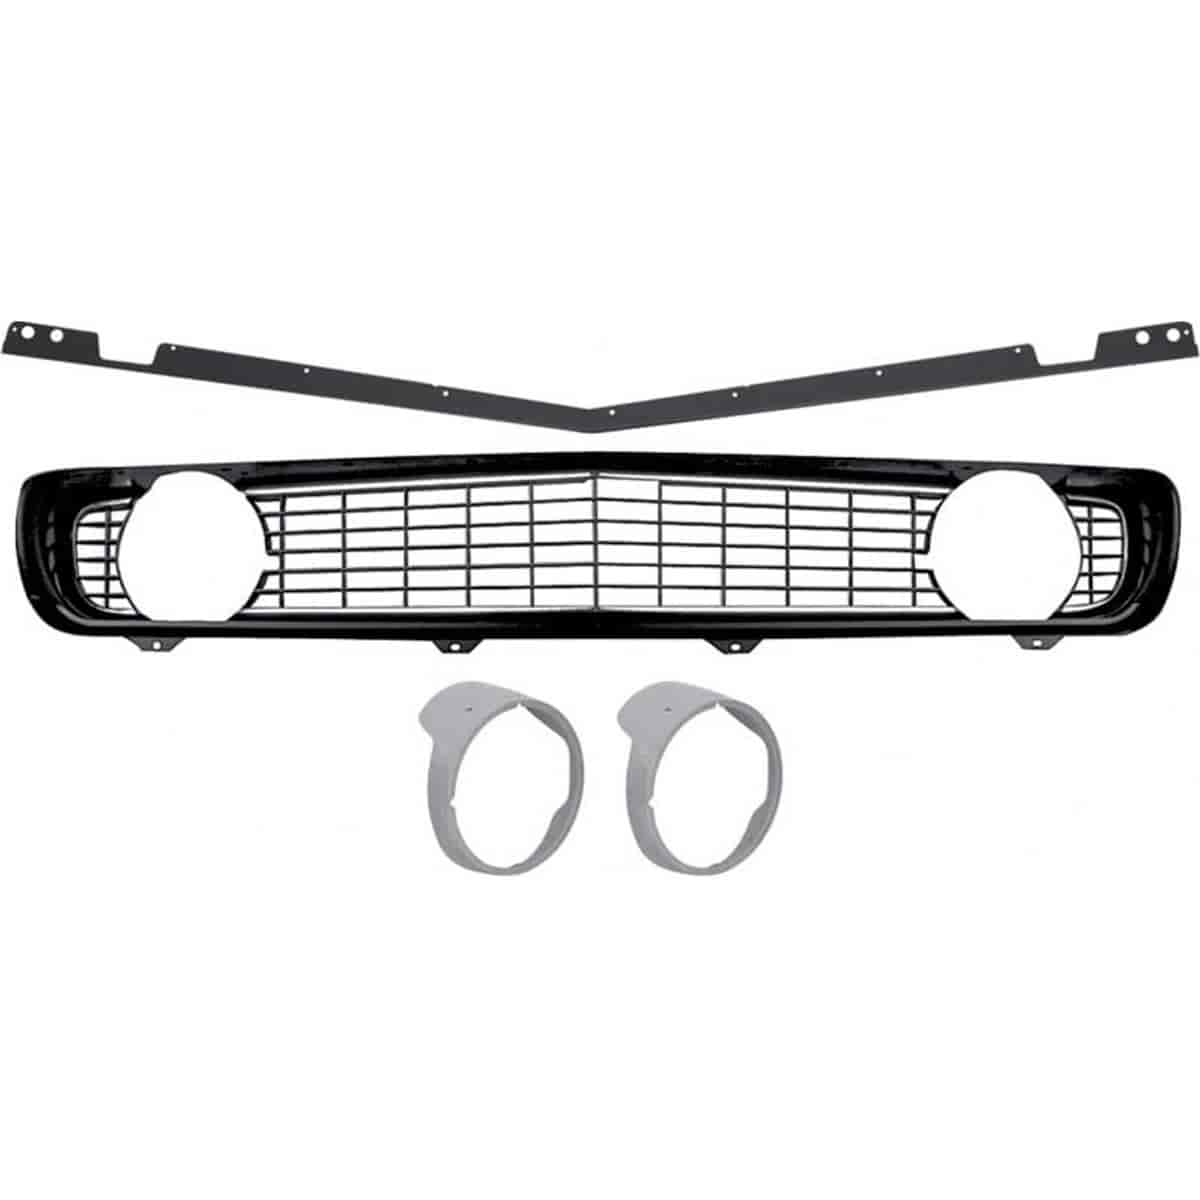 Chevrolet Camaro Complete Standard Black Grille Kit With